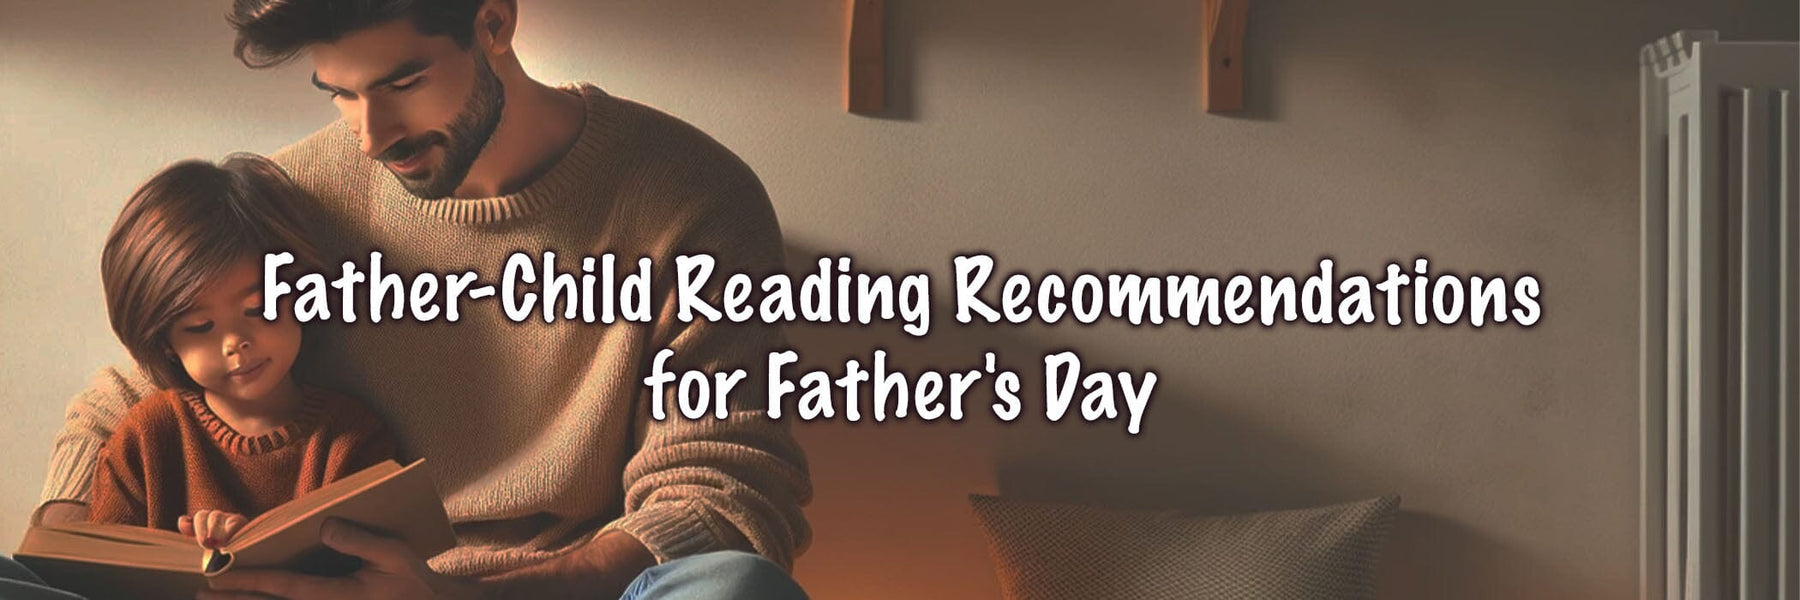 Bonding Over Books: Reading Recommendations for Father's Day